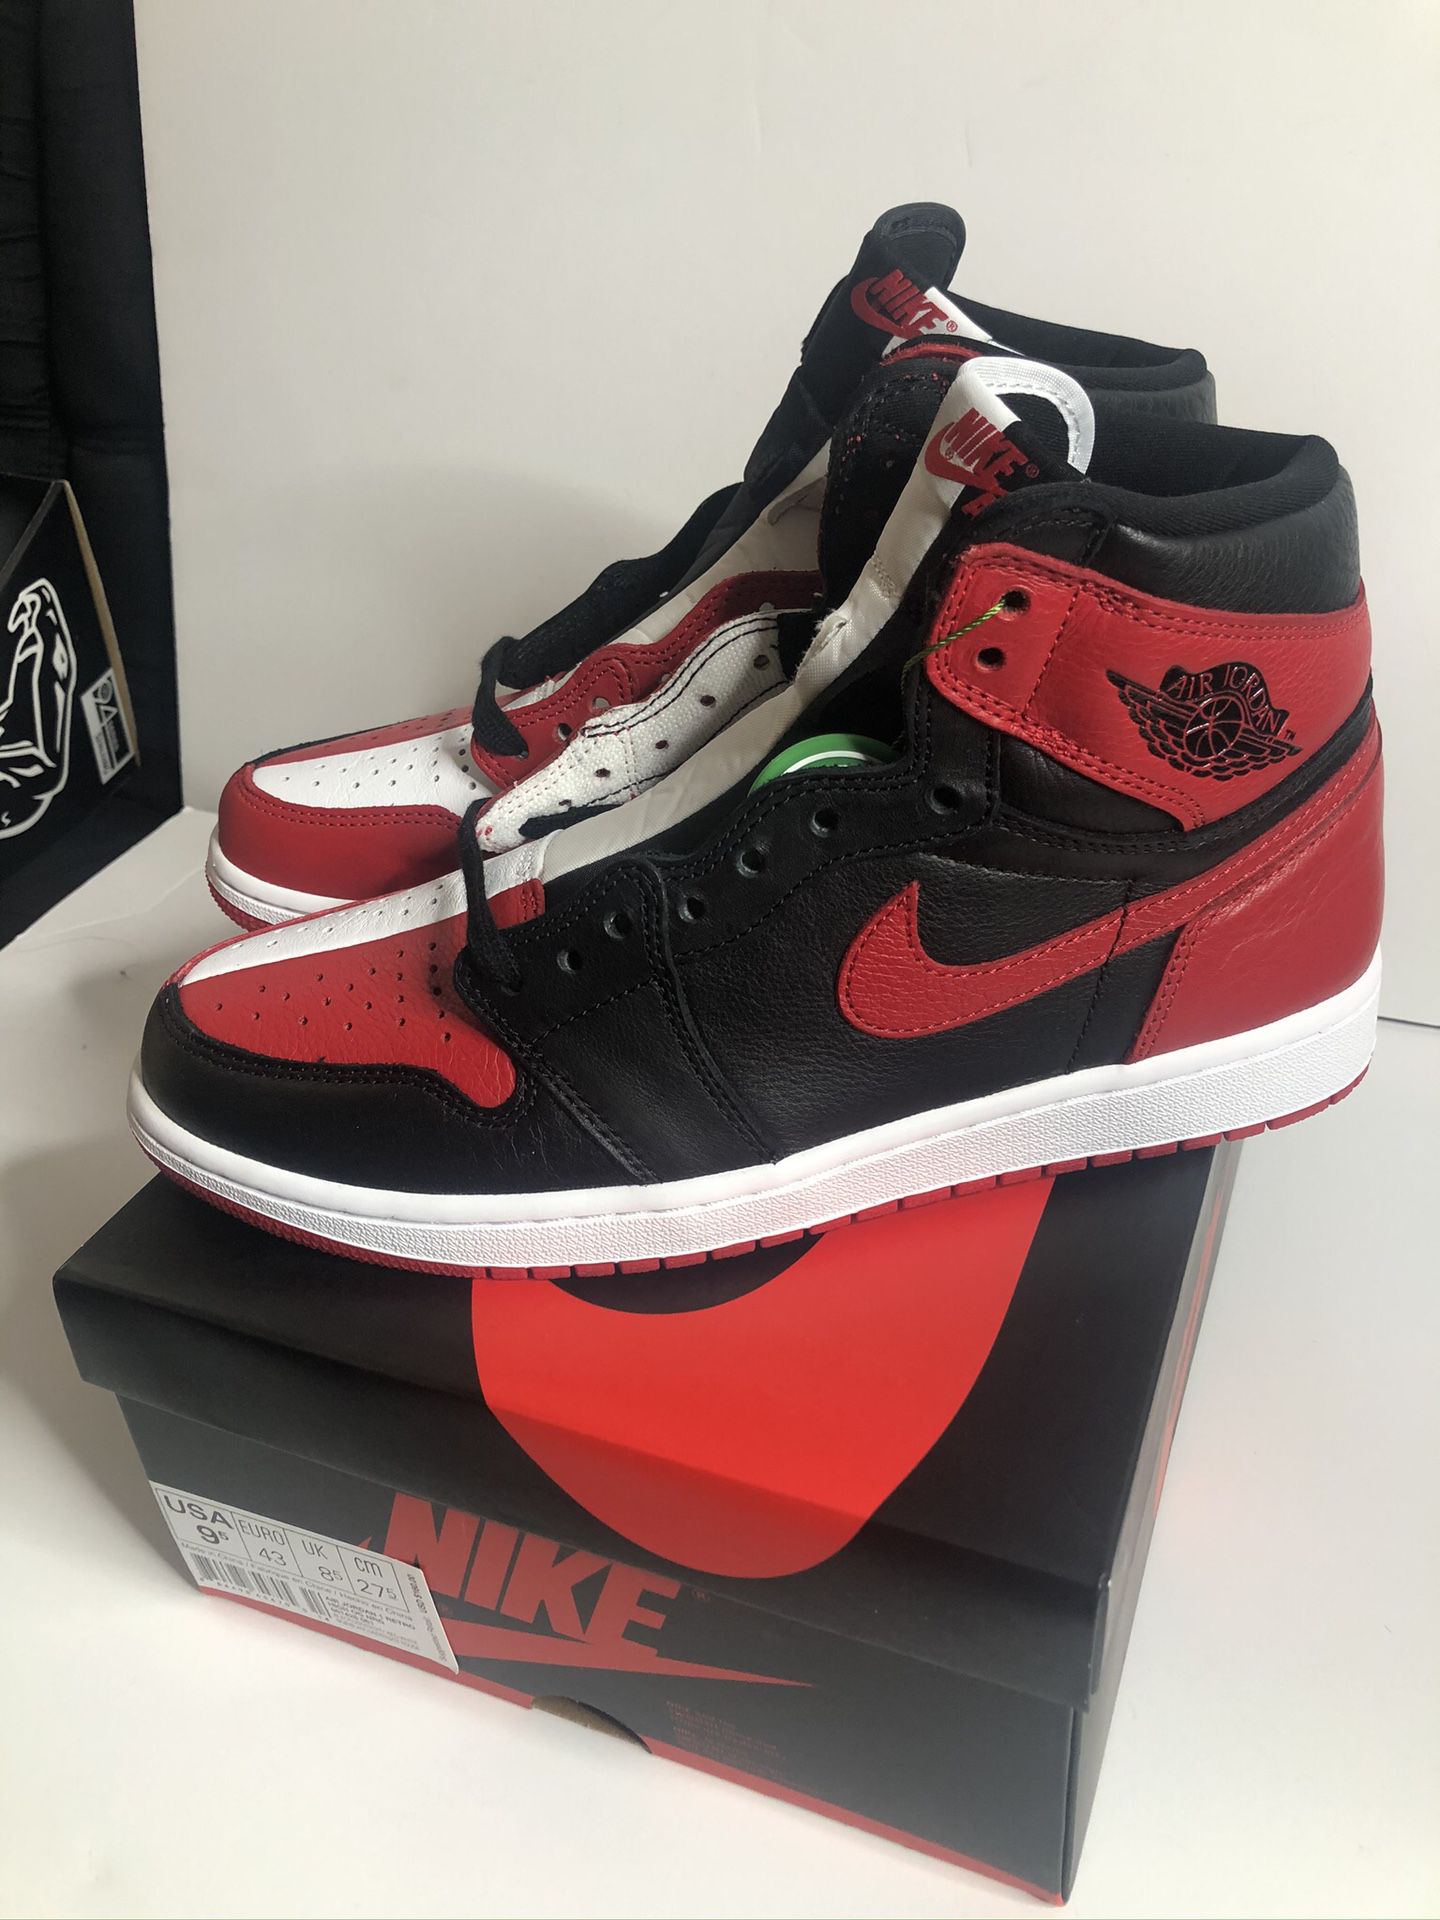 Nike air Jordan 1 homage to home size 9.5 brand new